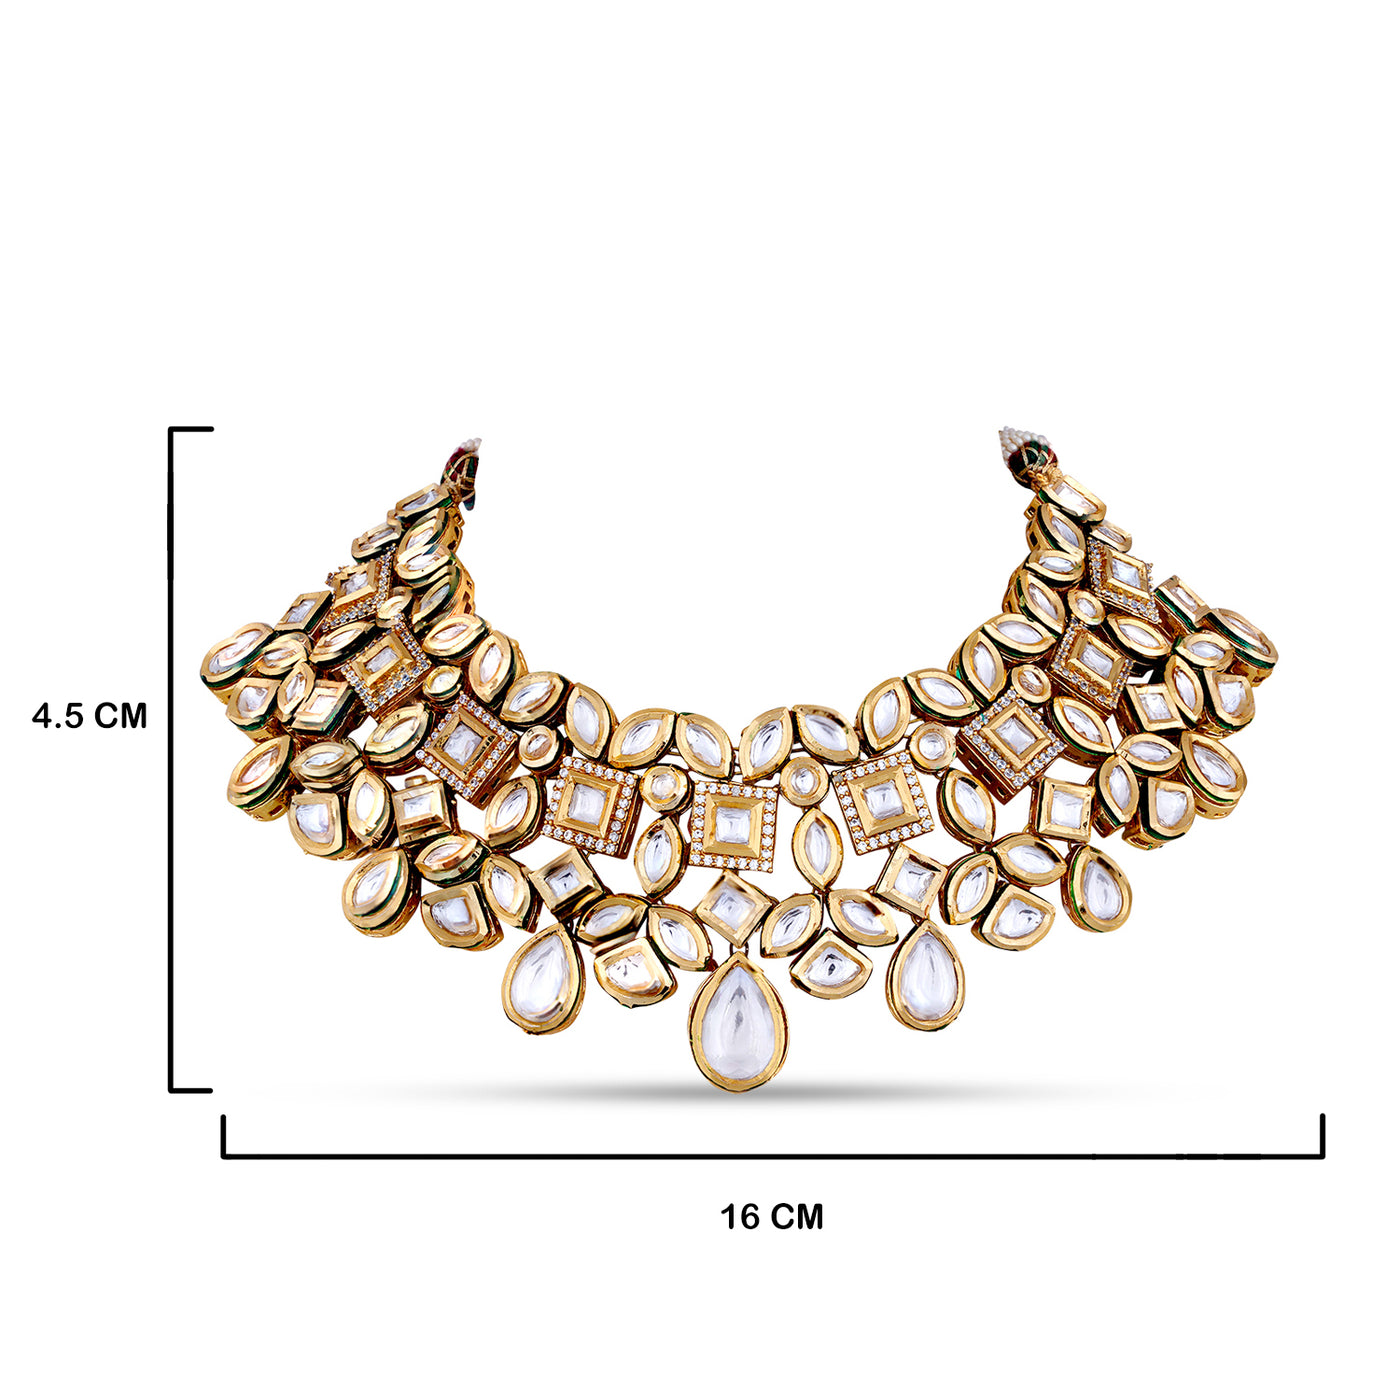  Classic Polki Studded Choker with measurements in cm. 4.5cm by 16cm.